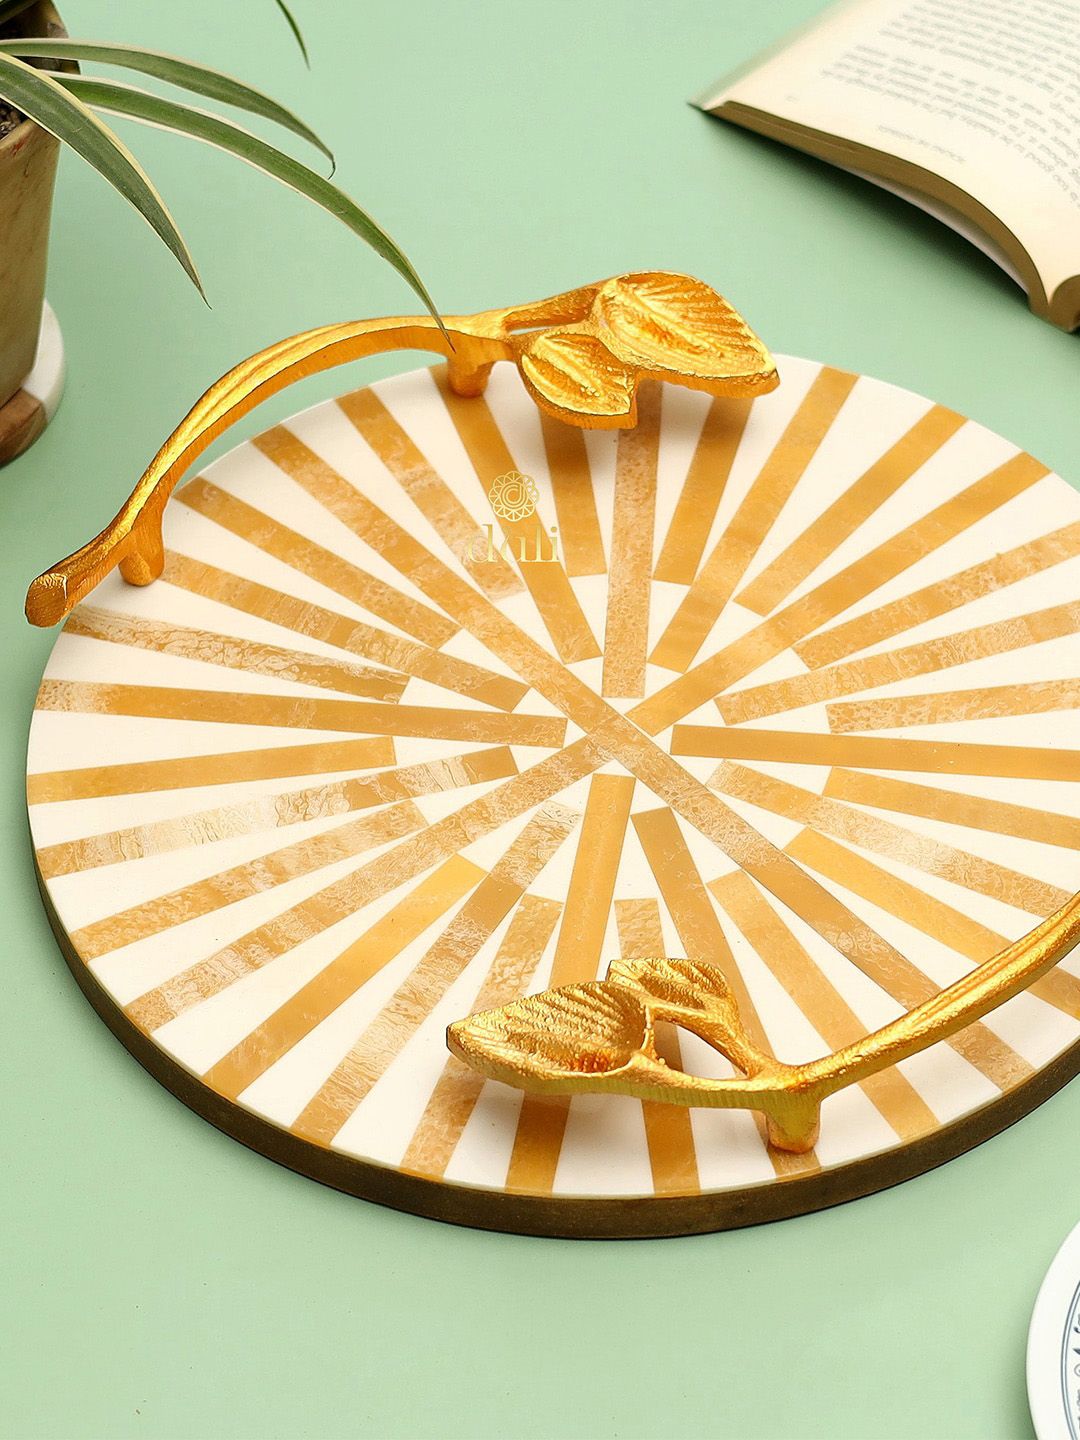 DULI Brown & Gold-Toned Round Multipurpose Serving Tray Platter Price in India